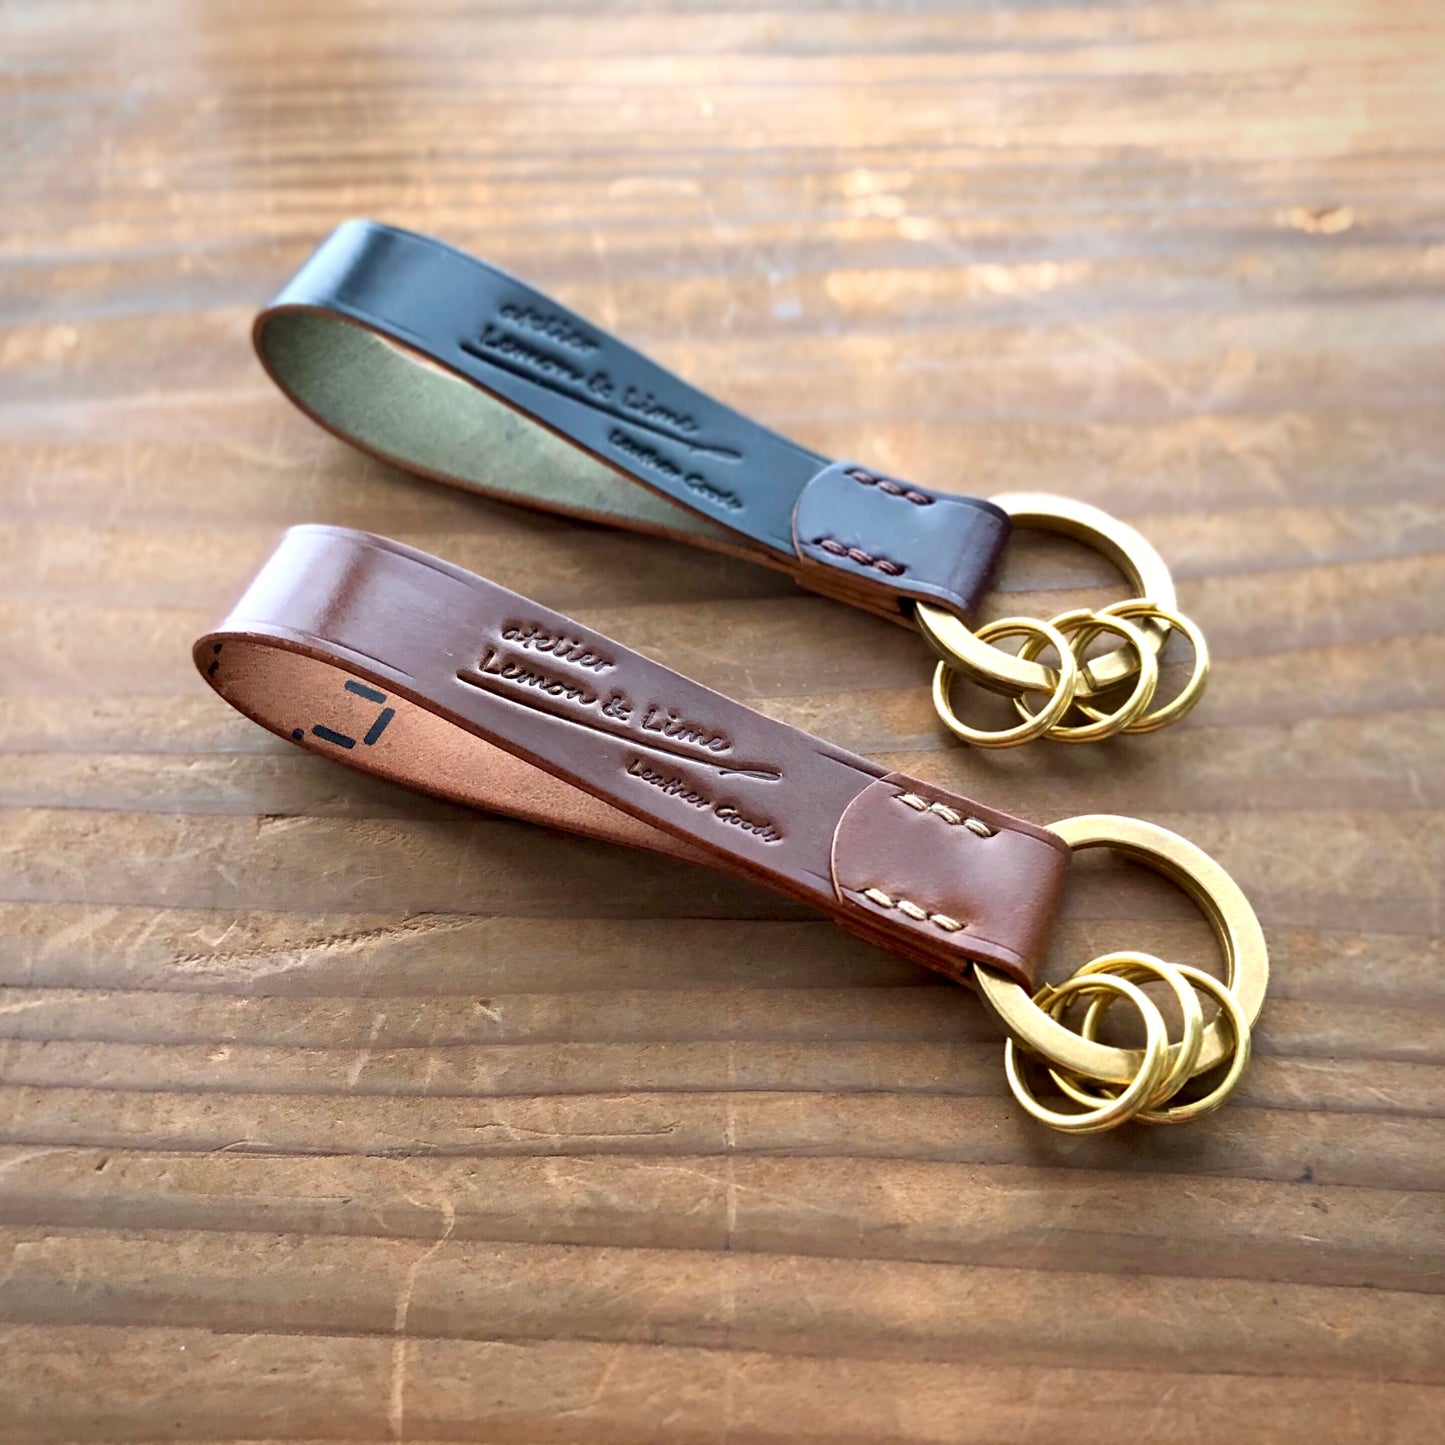 Shell Key Fob (Type A)【Horween】シェルコードバンのキーフォブ(A)